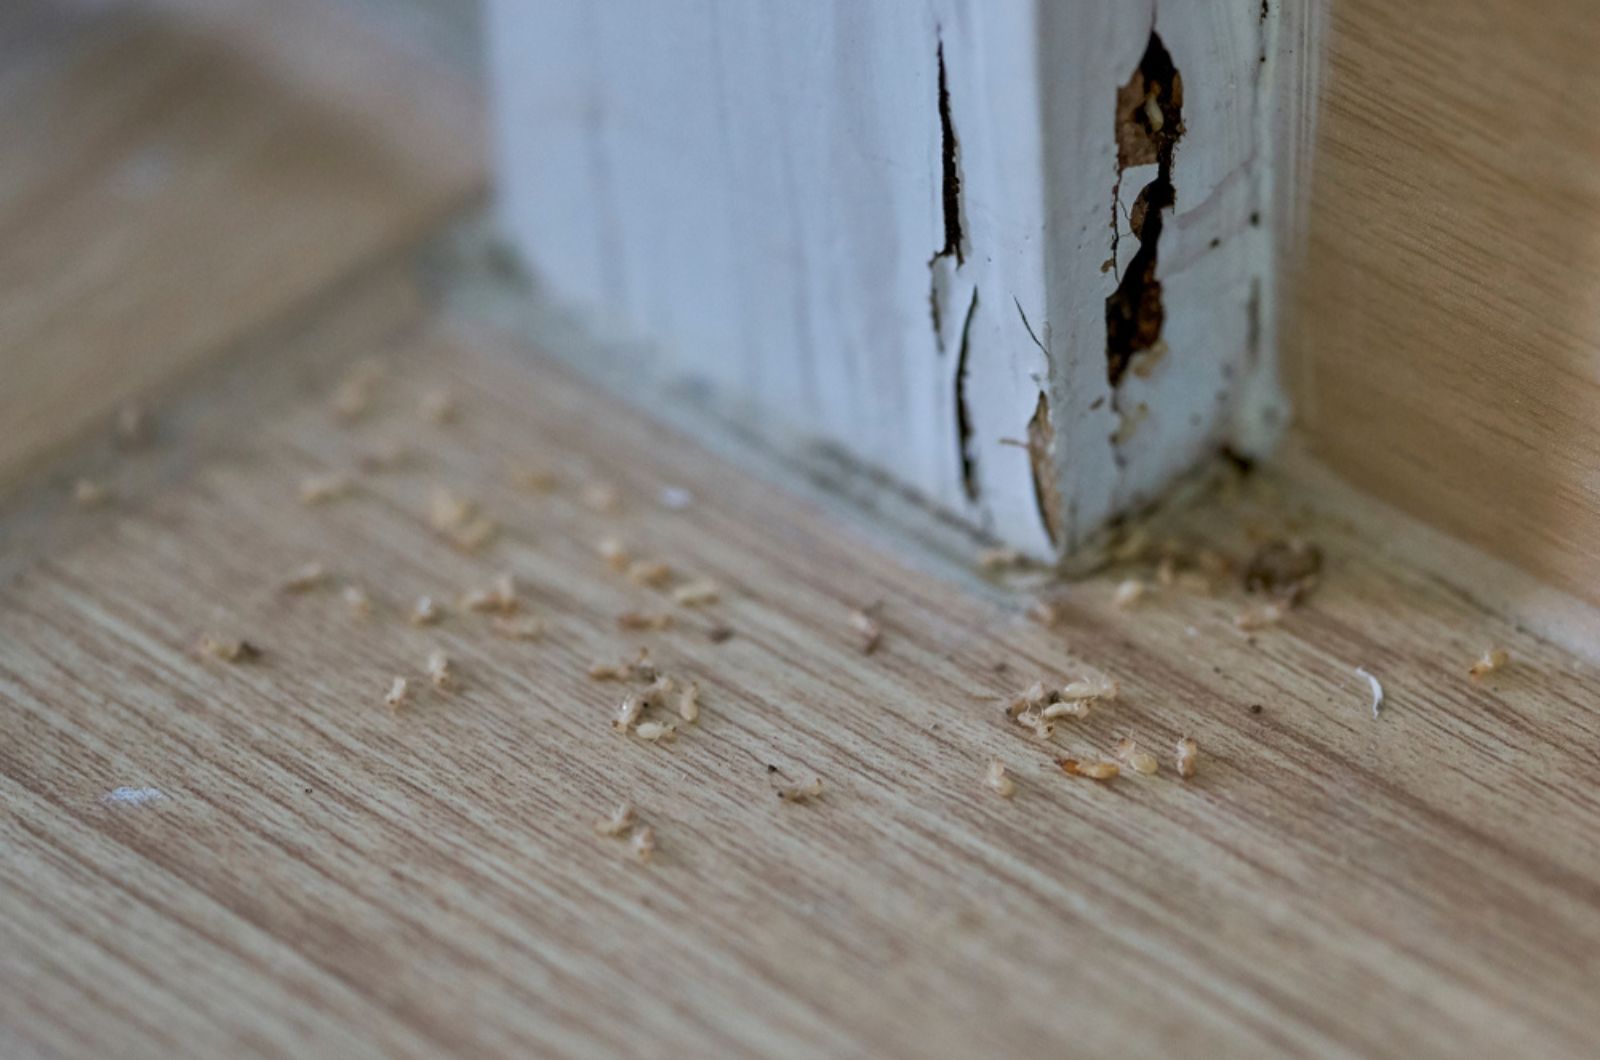 A close-up of termites in a house and the damage they caused.